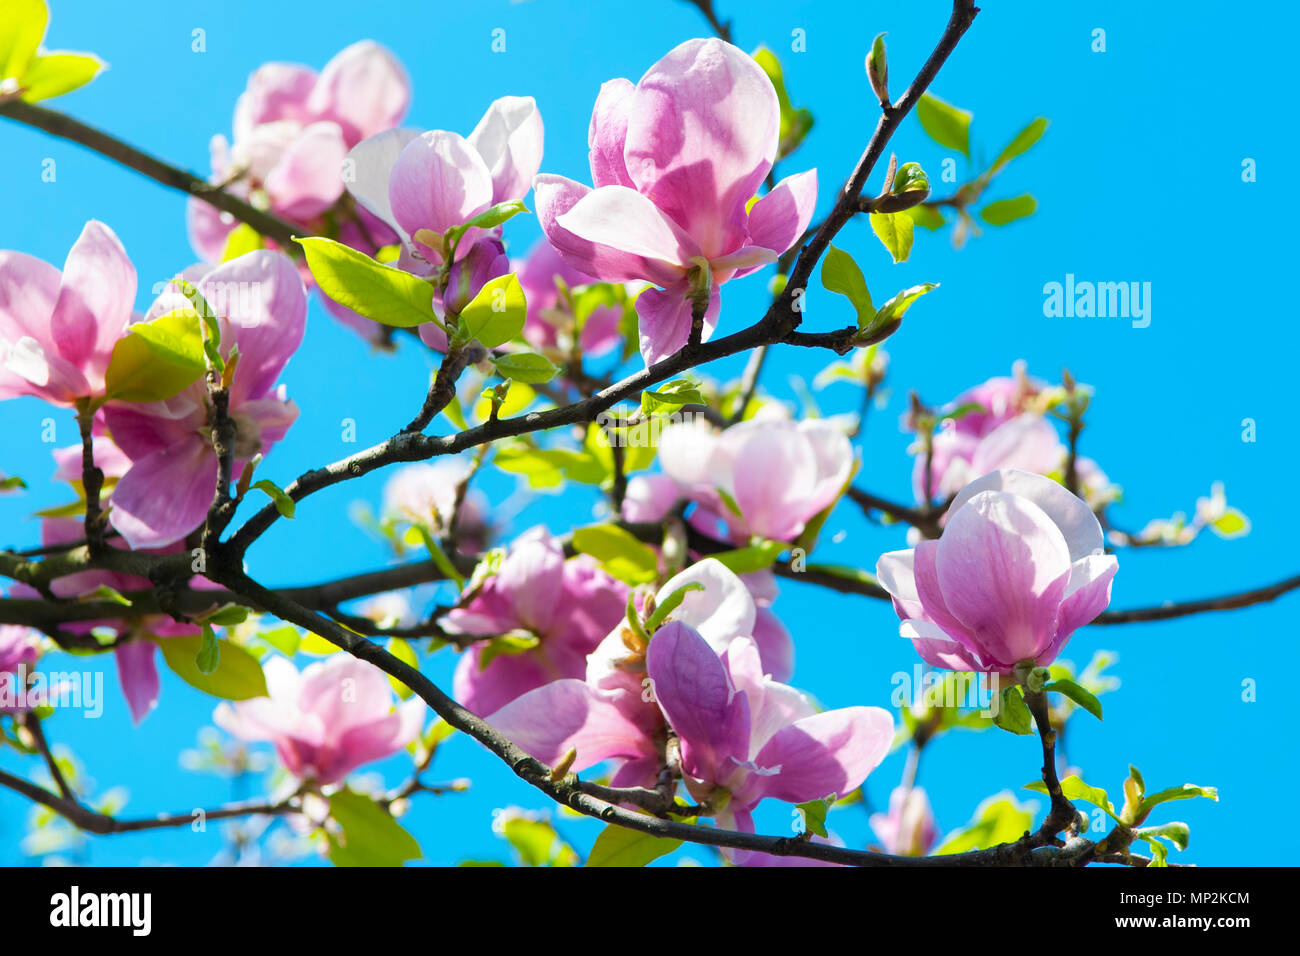 Spring magnolia tree flowers, natural floral background. Stock Photo